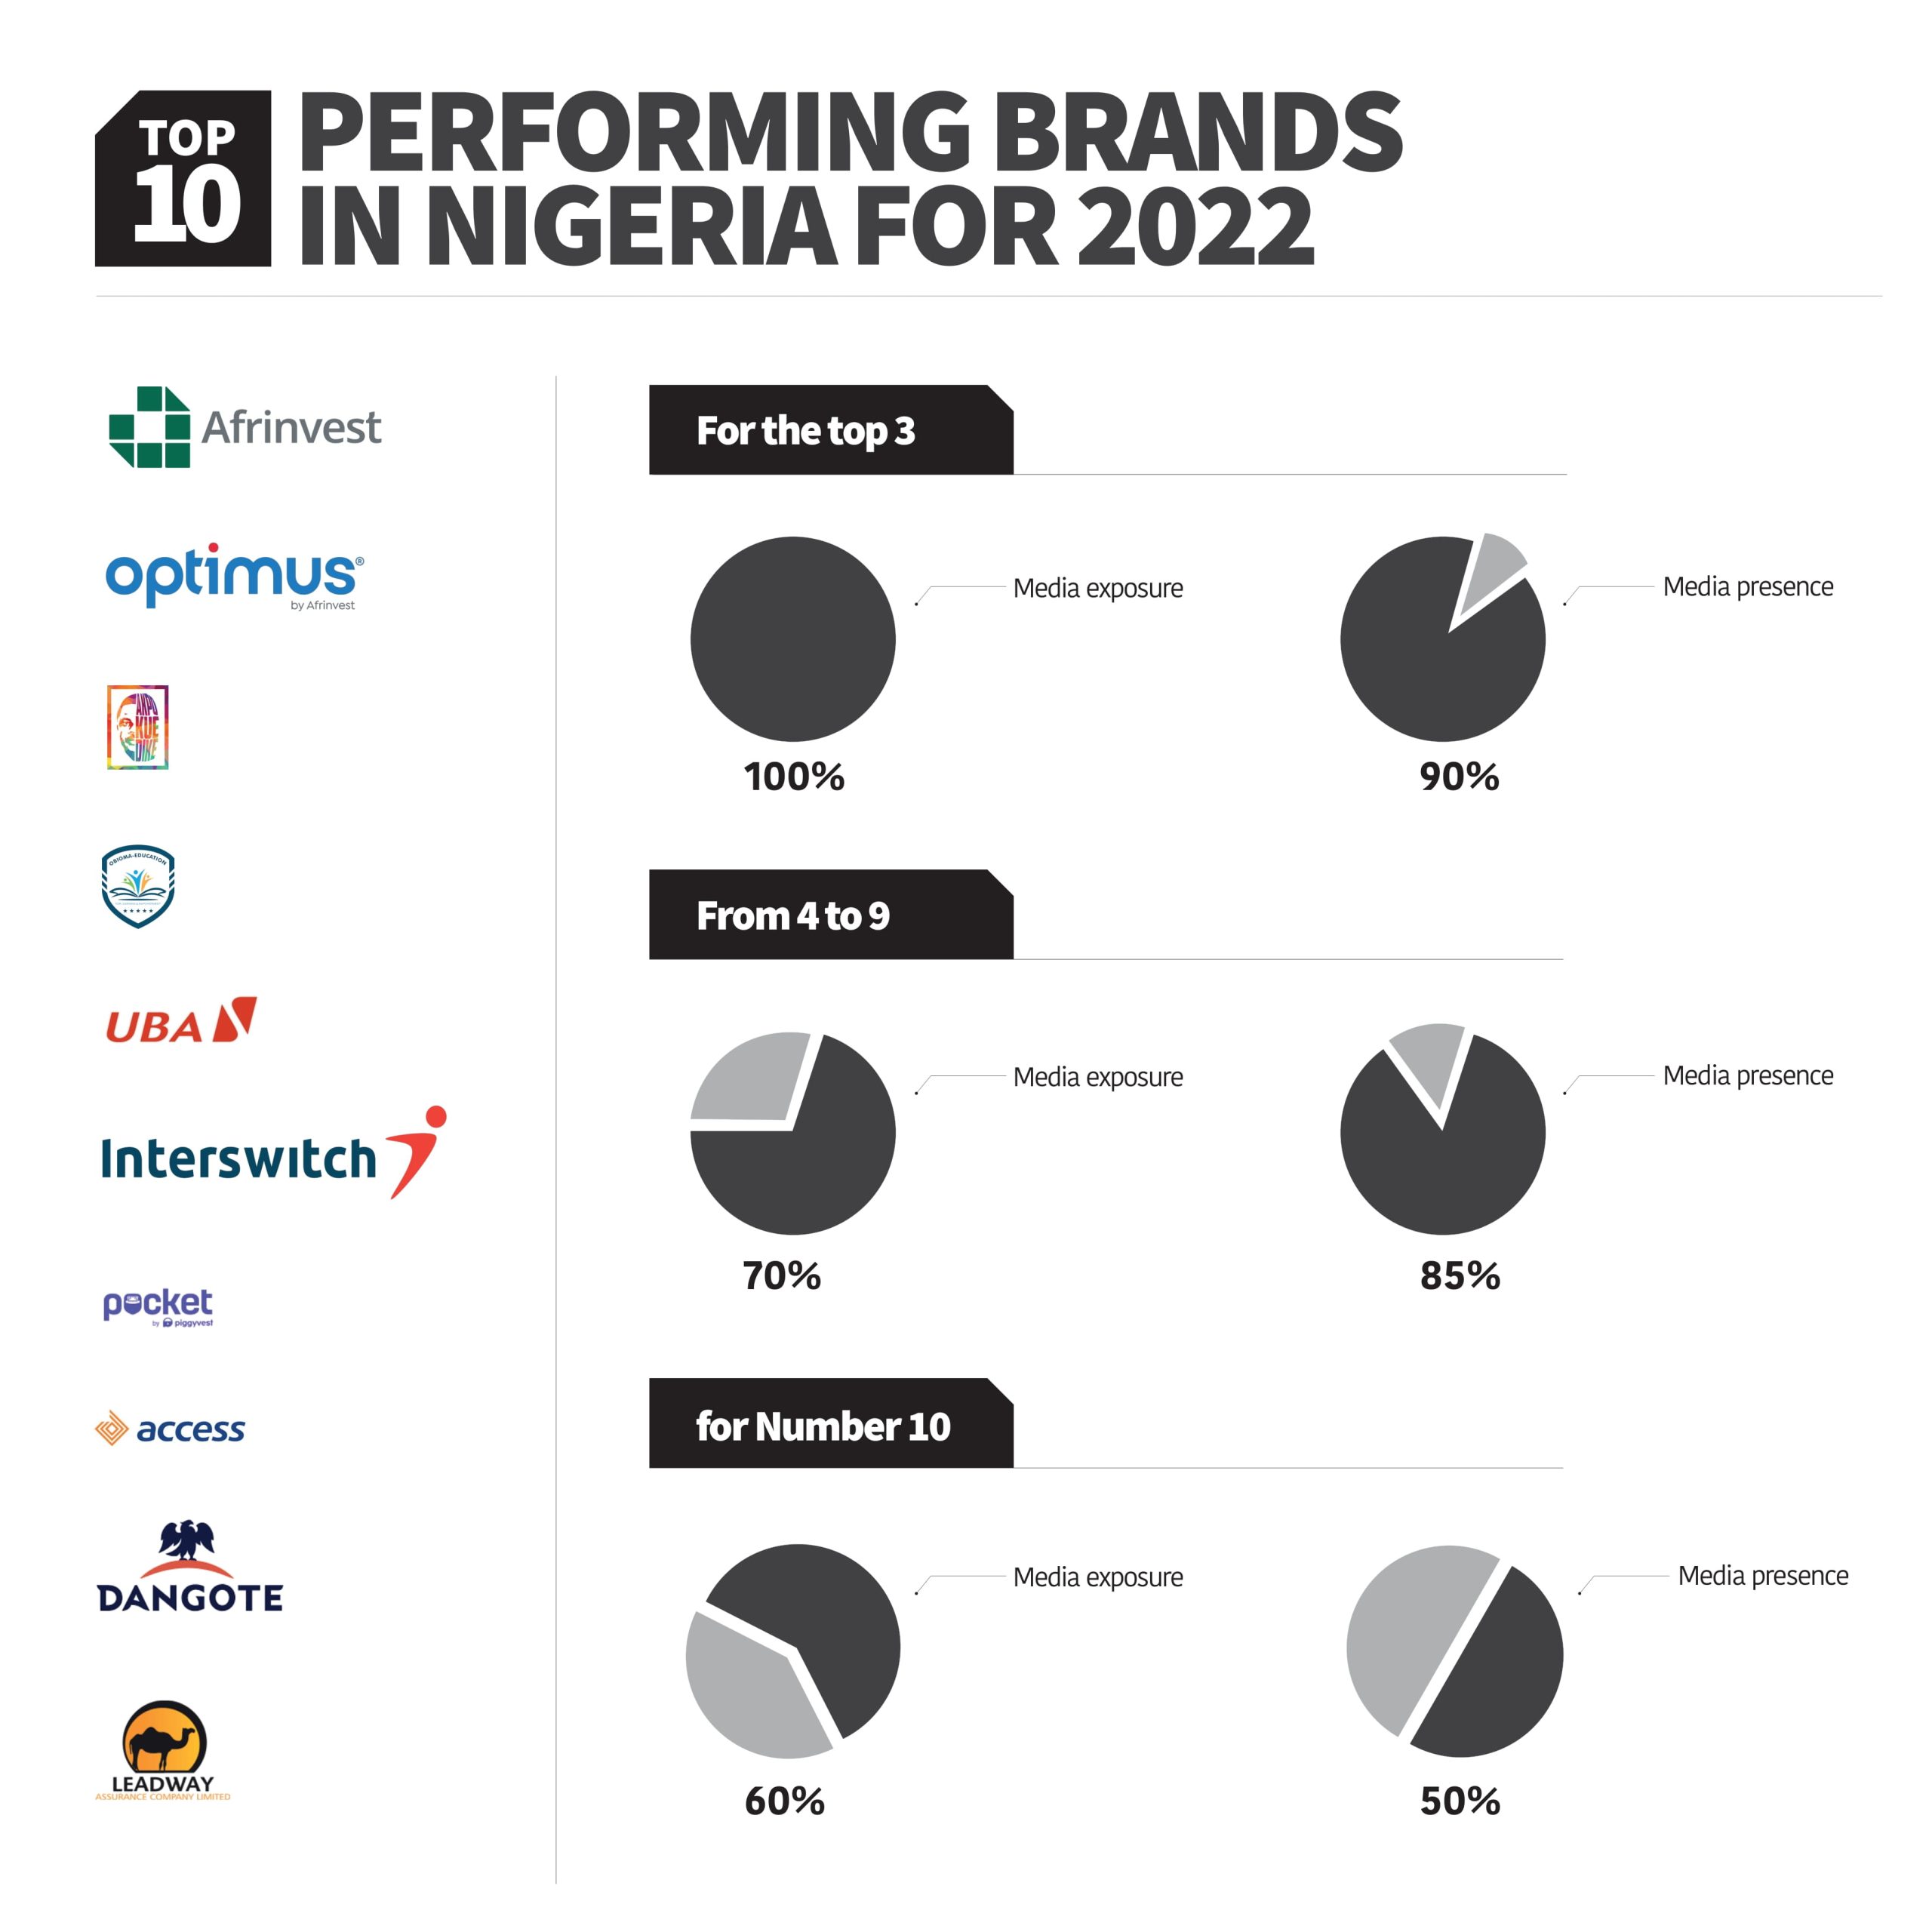 Top 10 Performing Brands In Nigeria For 2022